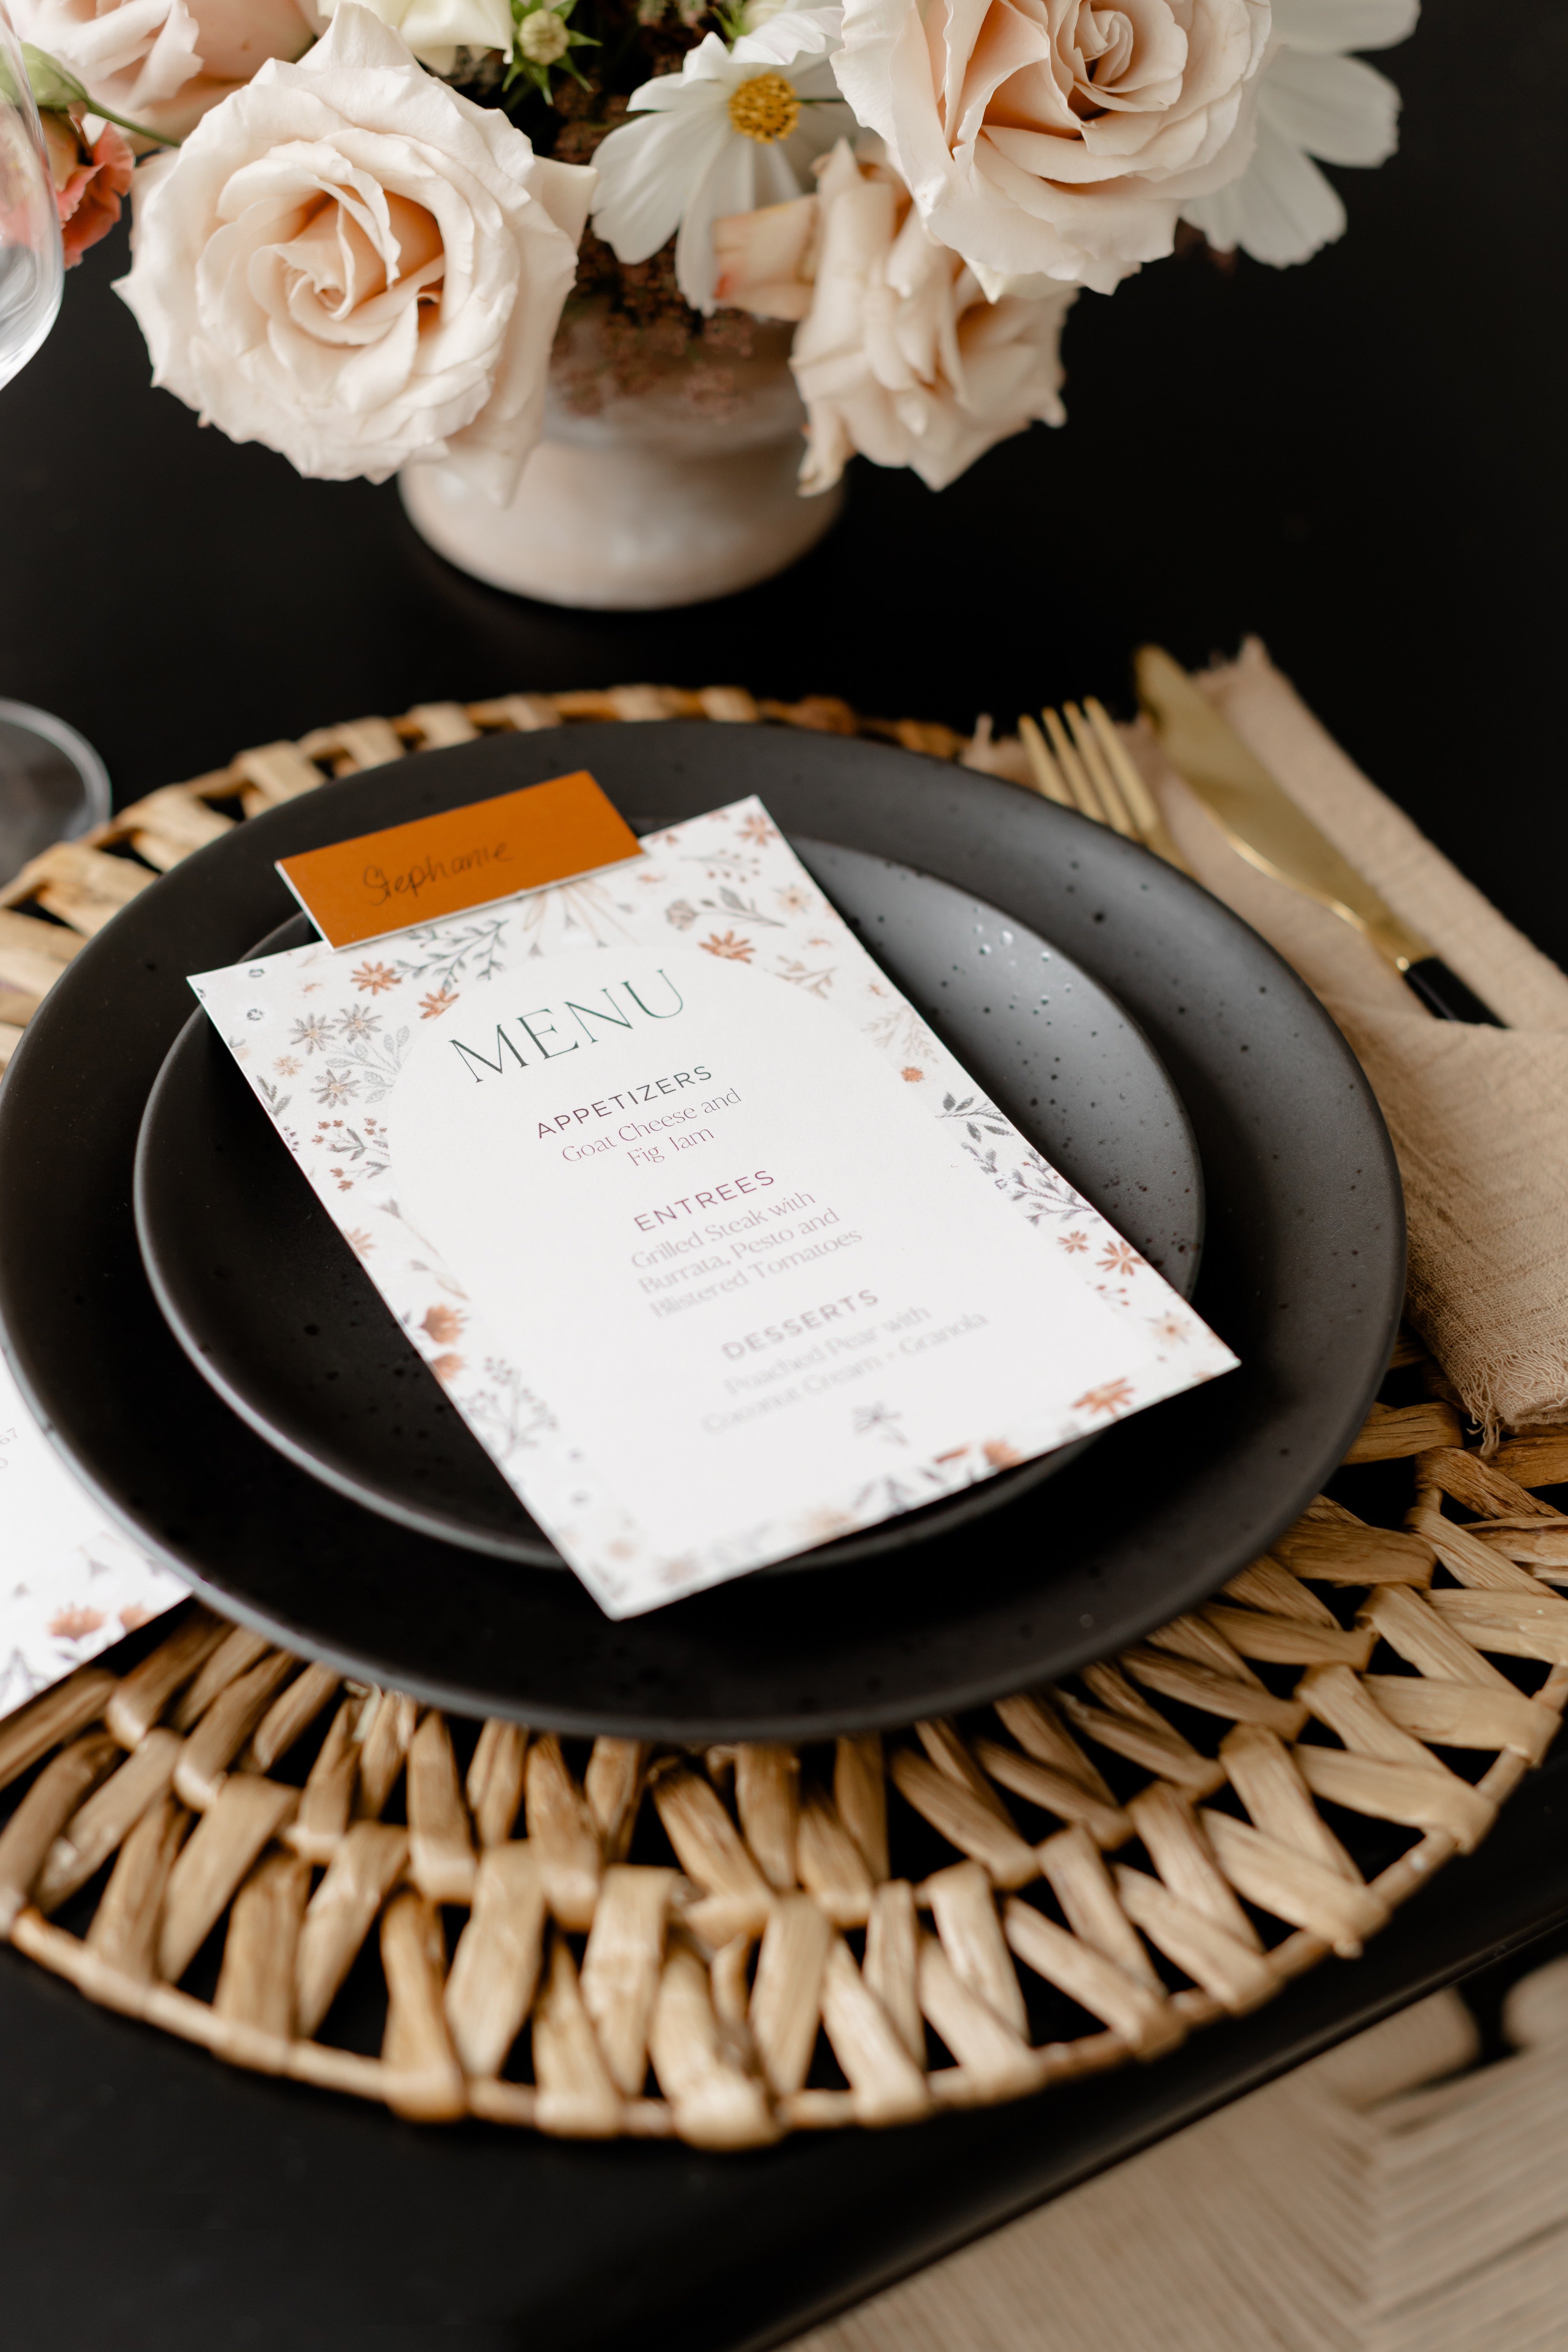 havest printable menu and place card shown on black plate setting with natural woven charger